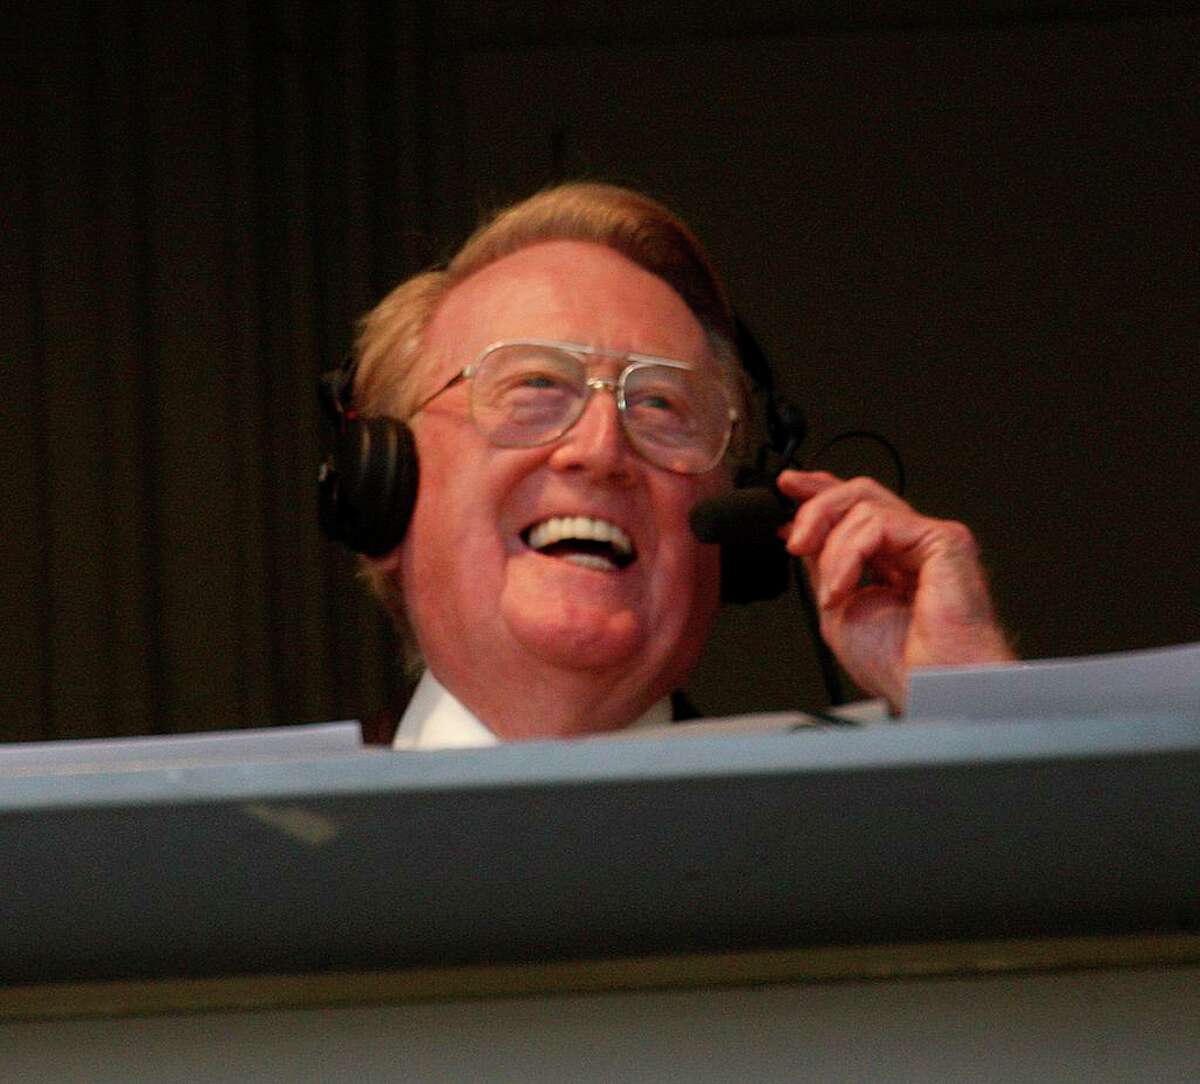 Los Angeles Dodgers sportscaster Vin Scully laughs during the Dodgers-Angels exhibition game at Dodger Stadium on March 28, 2011. (Allen J. Schaben/Los Angeles Times/TNS)